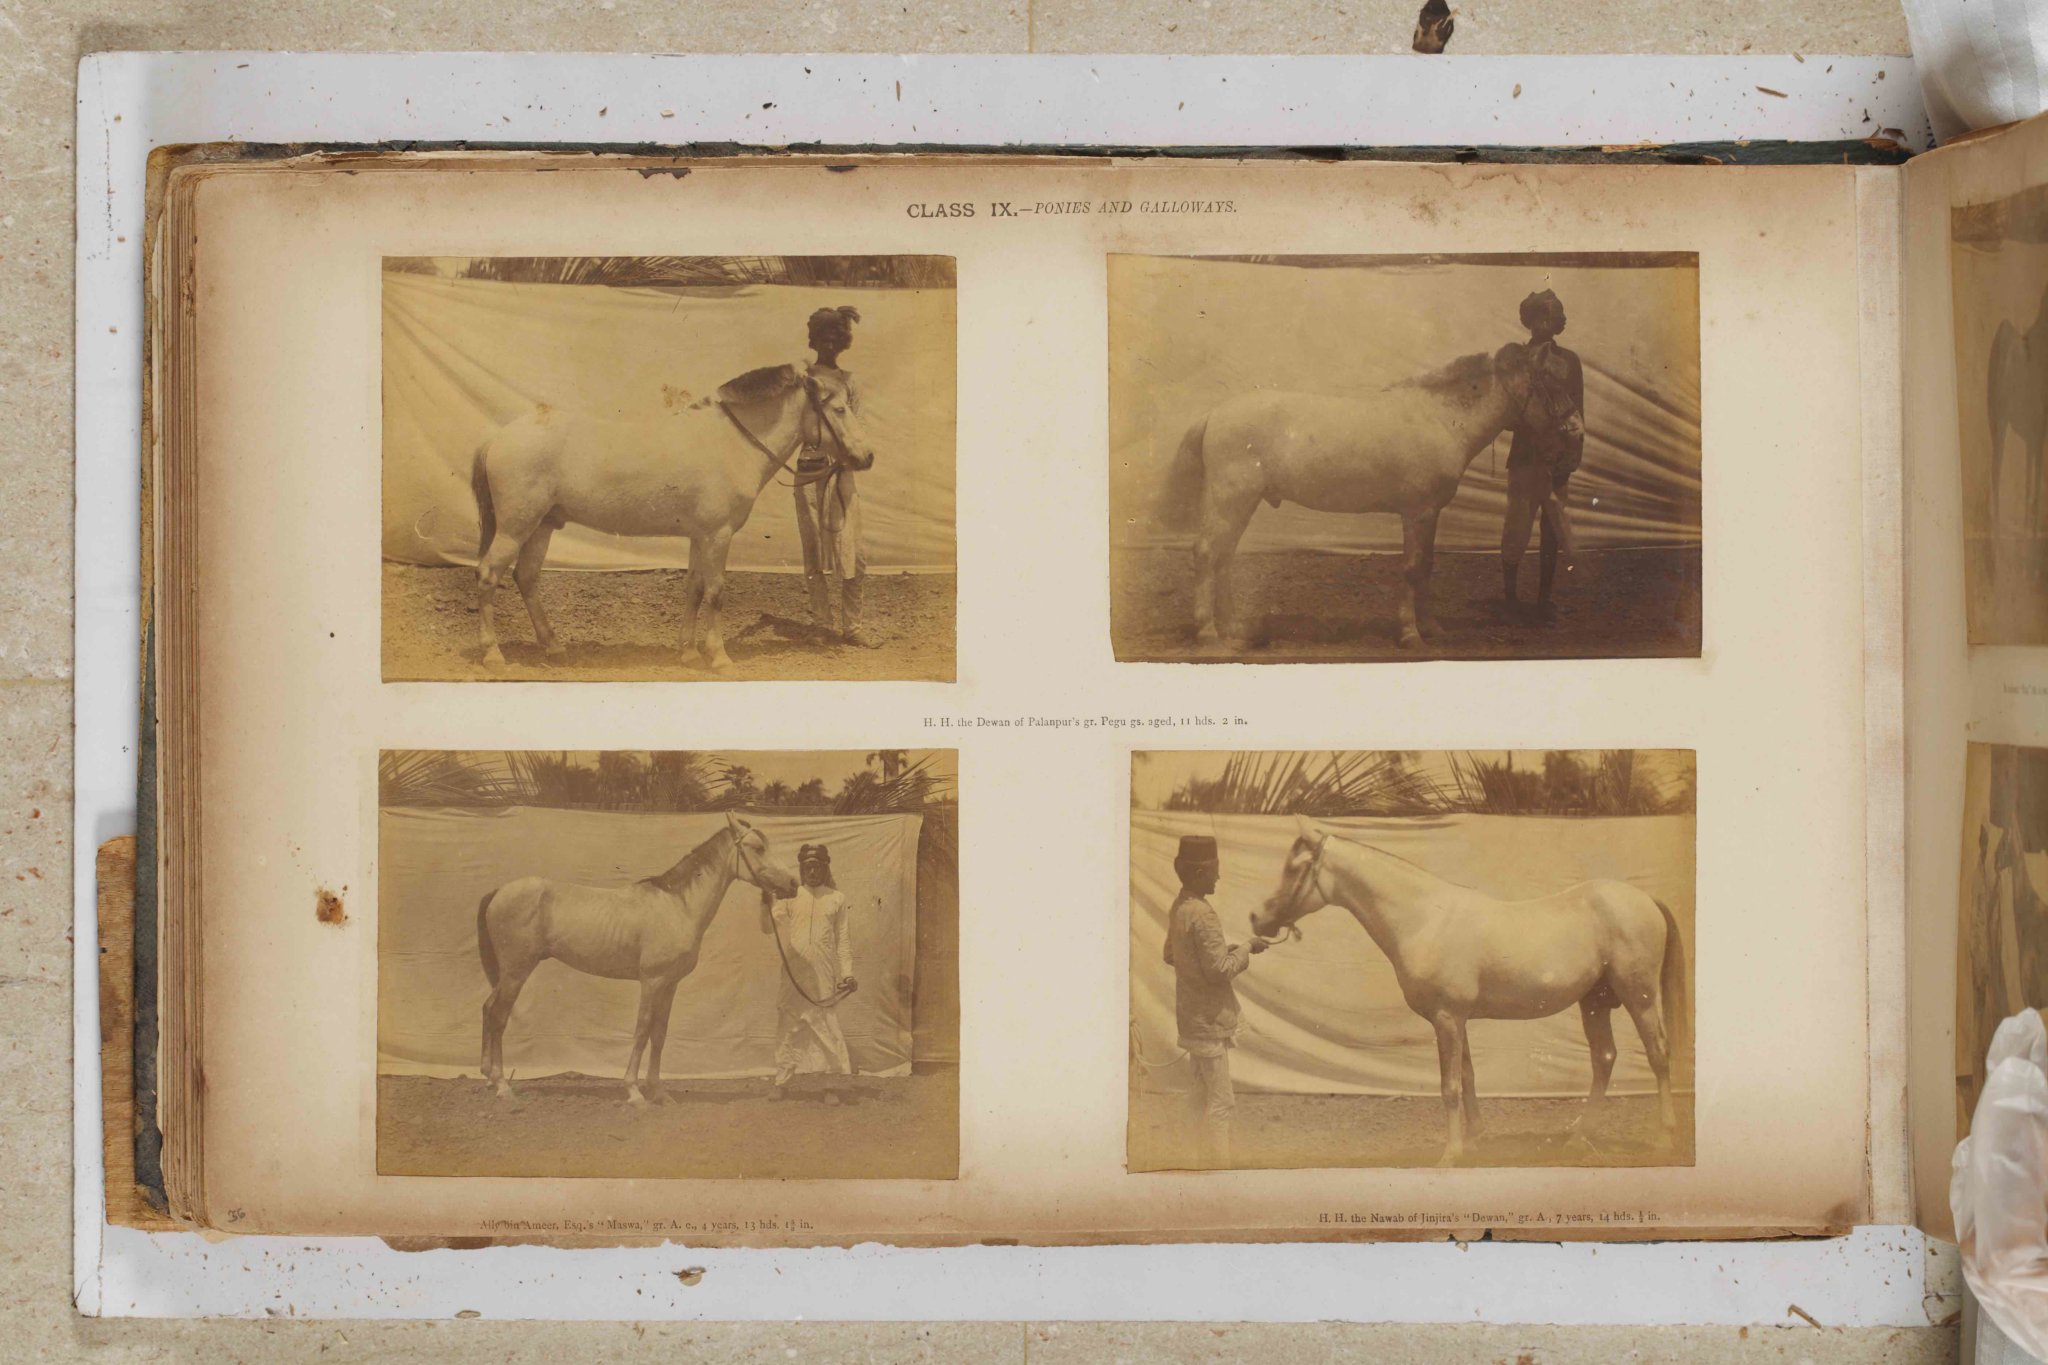 Magnificent Beasts and Where to Find them: At the Bombay Horse and Cattle Show, 1890 - Animals, Buffalo, Camel, Cattle, Horses, Komal Chitnis, Magnificent Beasts